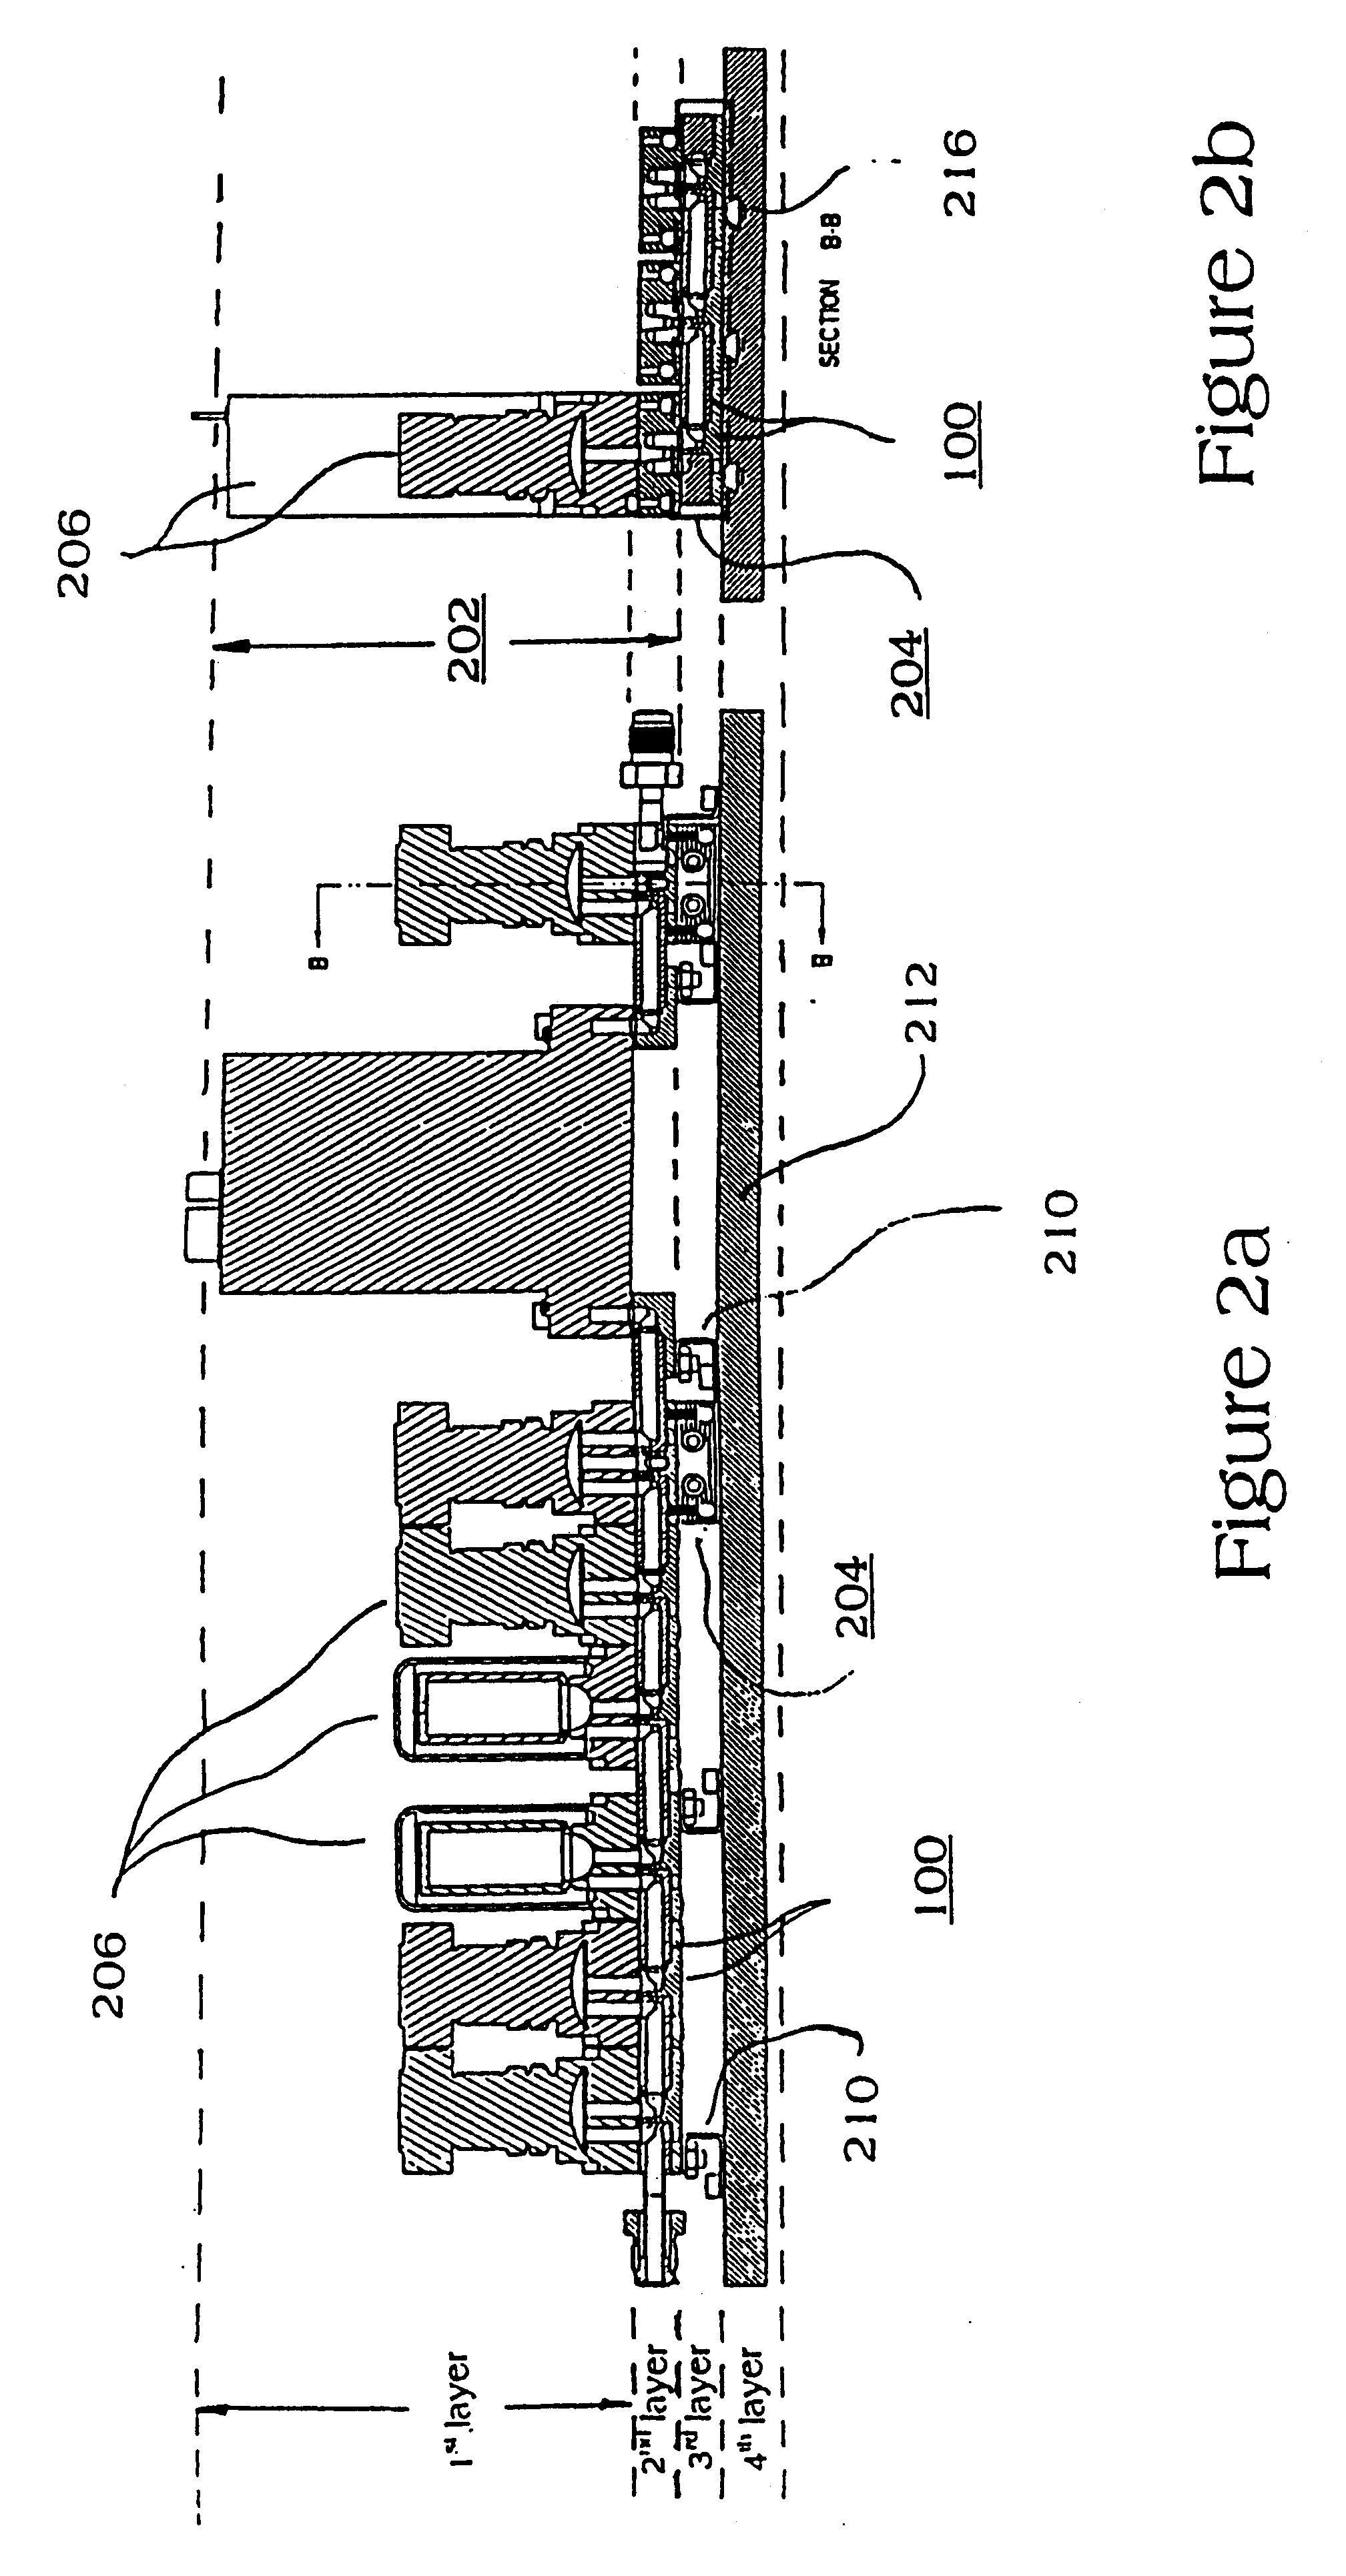 System of modular substrates for enabling the distribution of process fluids through removable components